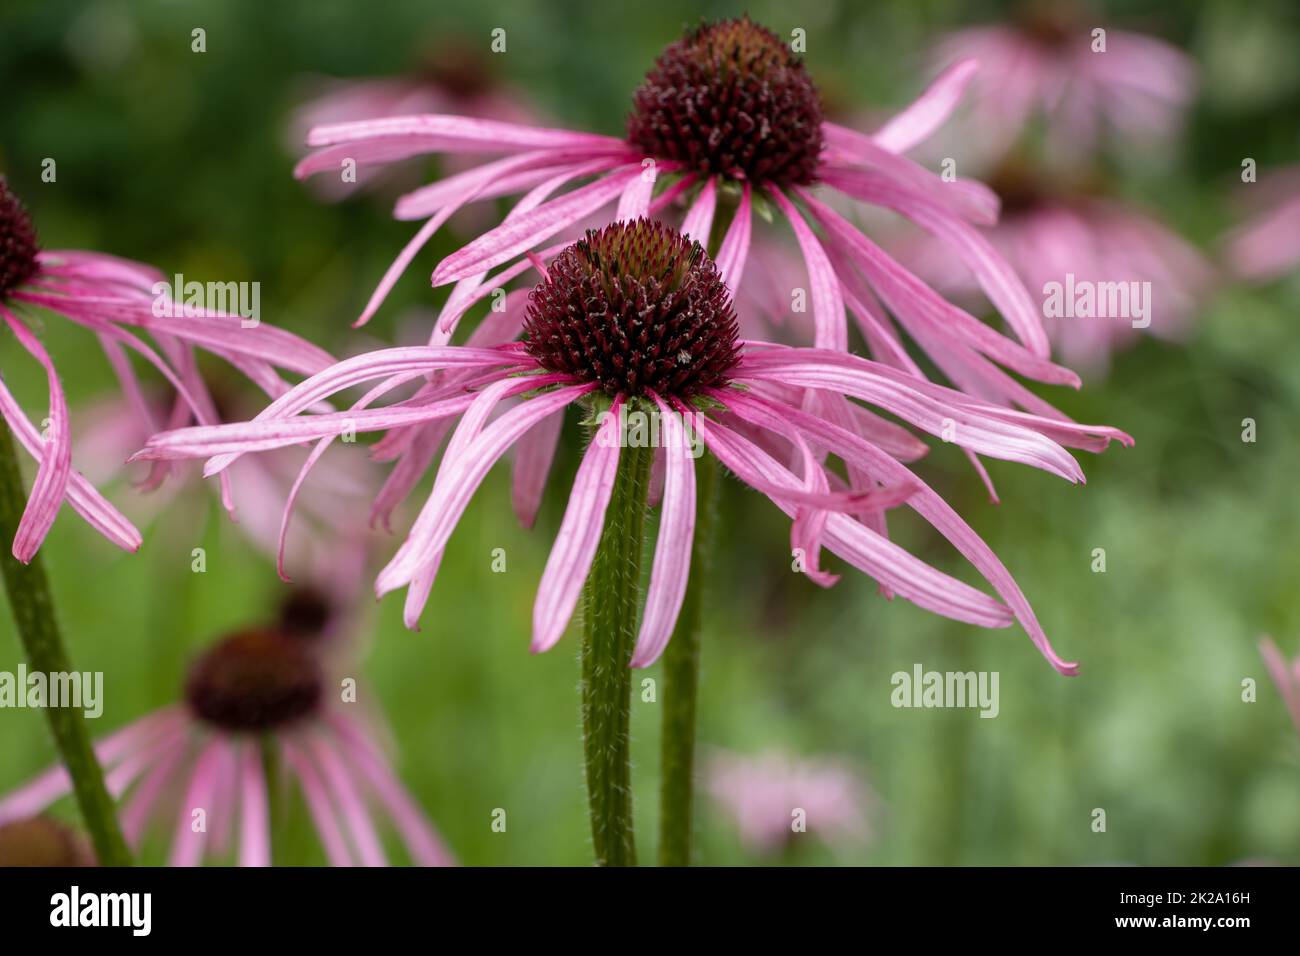 Purple coneflowers (Echinacea purpurea), also called red pseudoconeflowers, is a plant species from the coneflowers genus (Echinacea) in the daisy family (Asteraceae). It is native to the eastern and central United States, where it is called Eastern pu Stock Photo